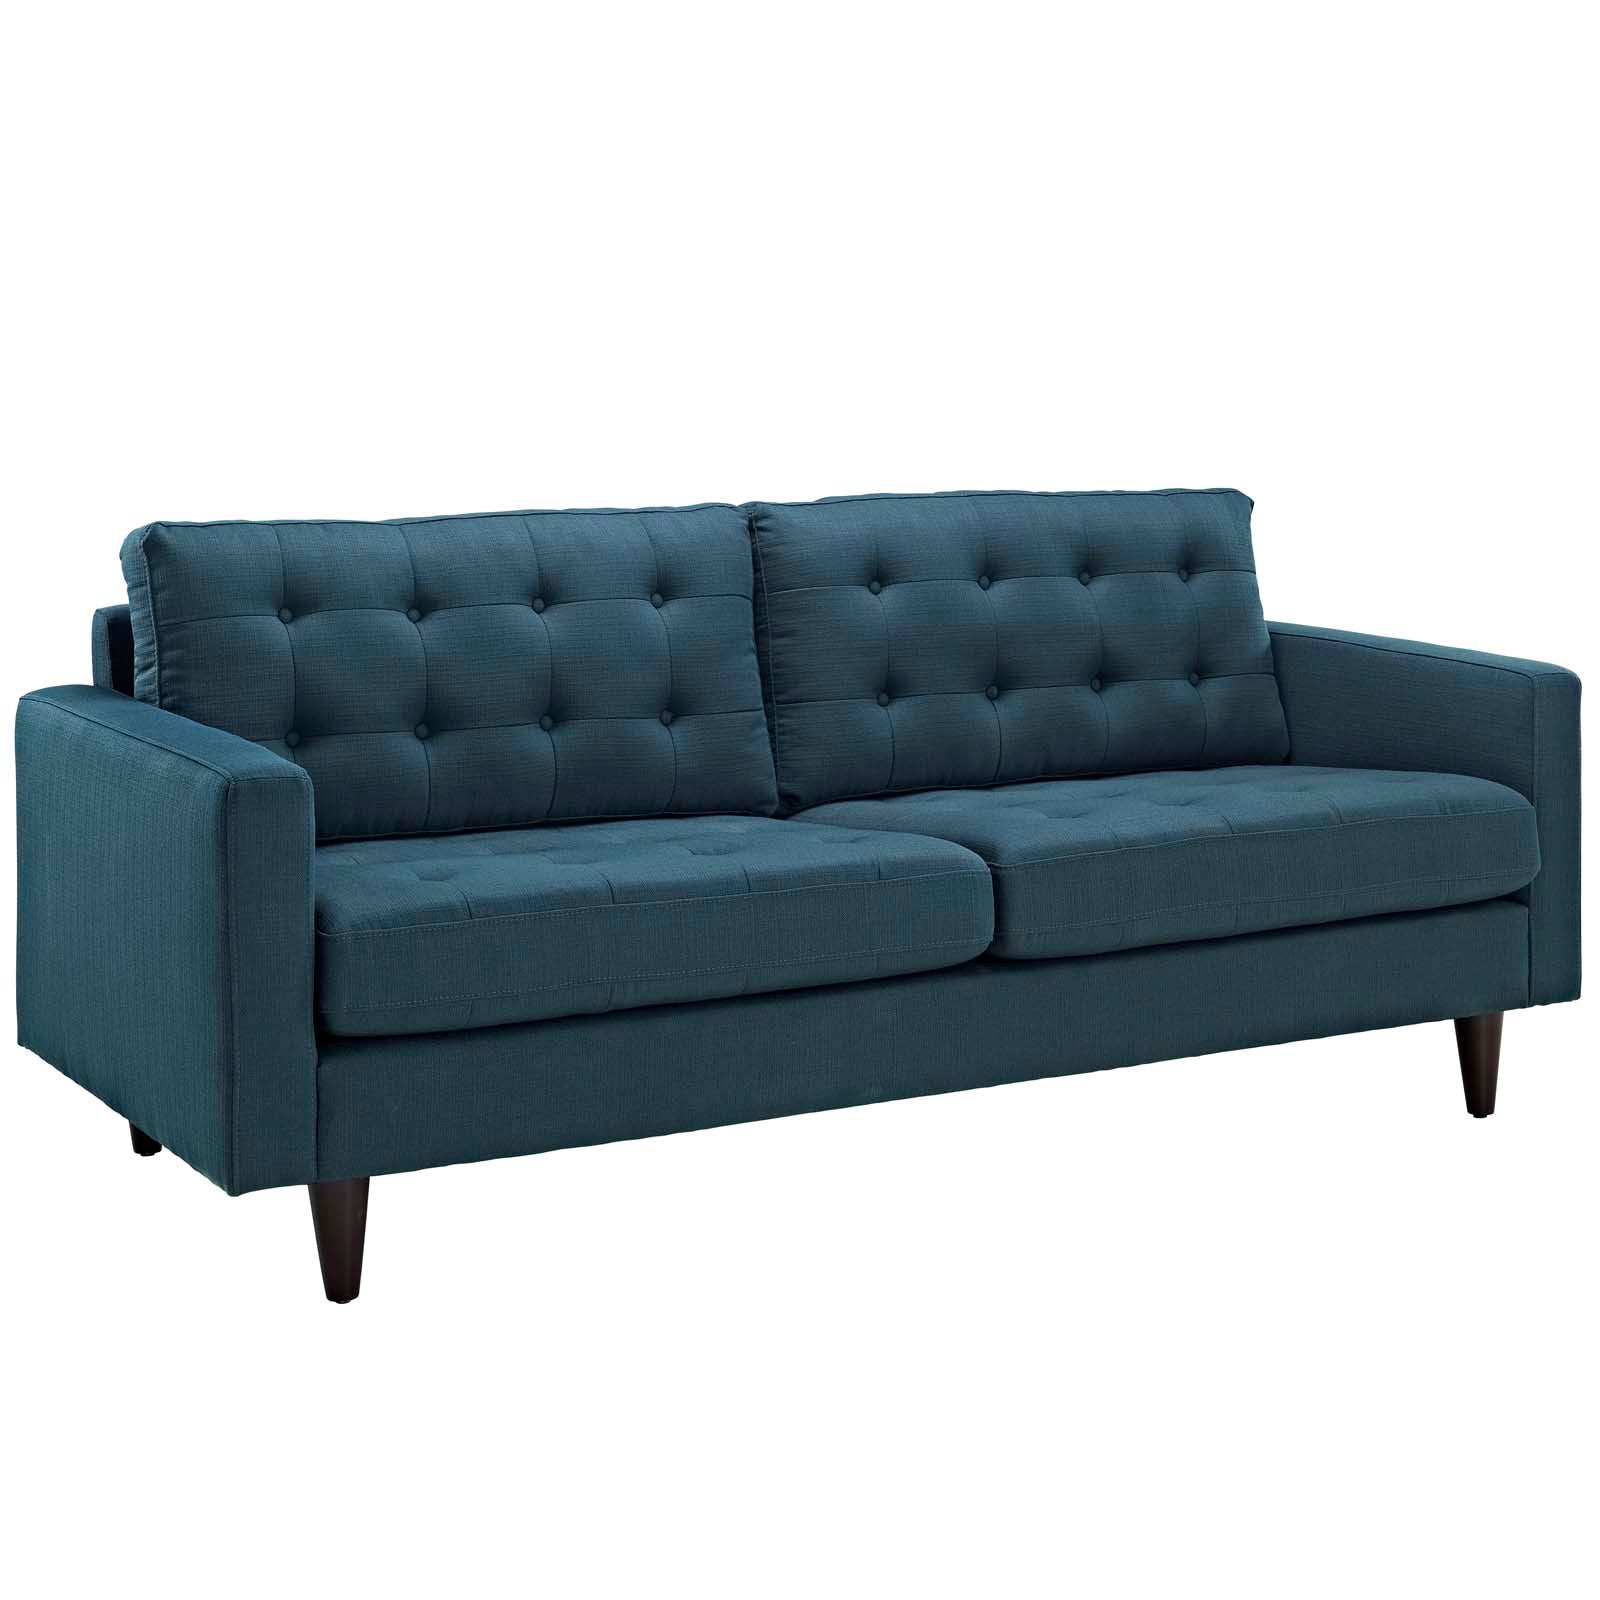 Modway Sofas & Couches - Empress Upholstered Fabric Sofa Azure